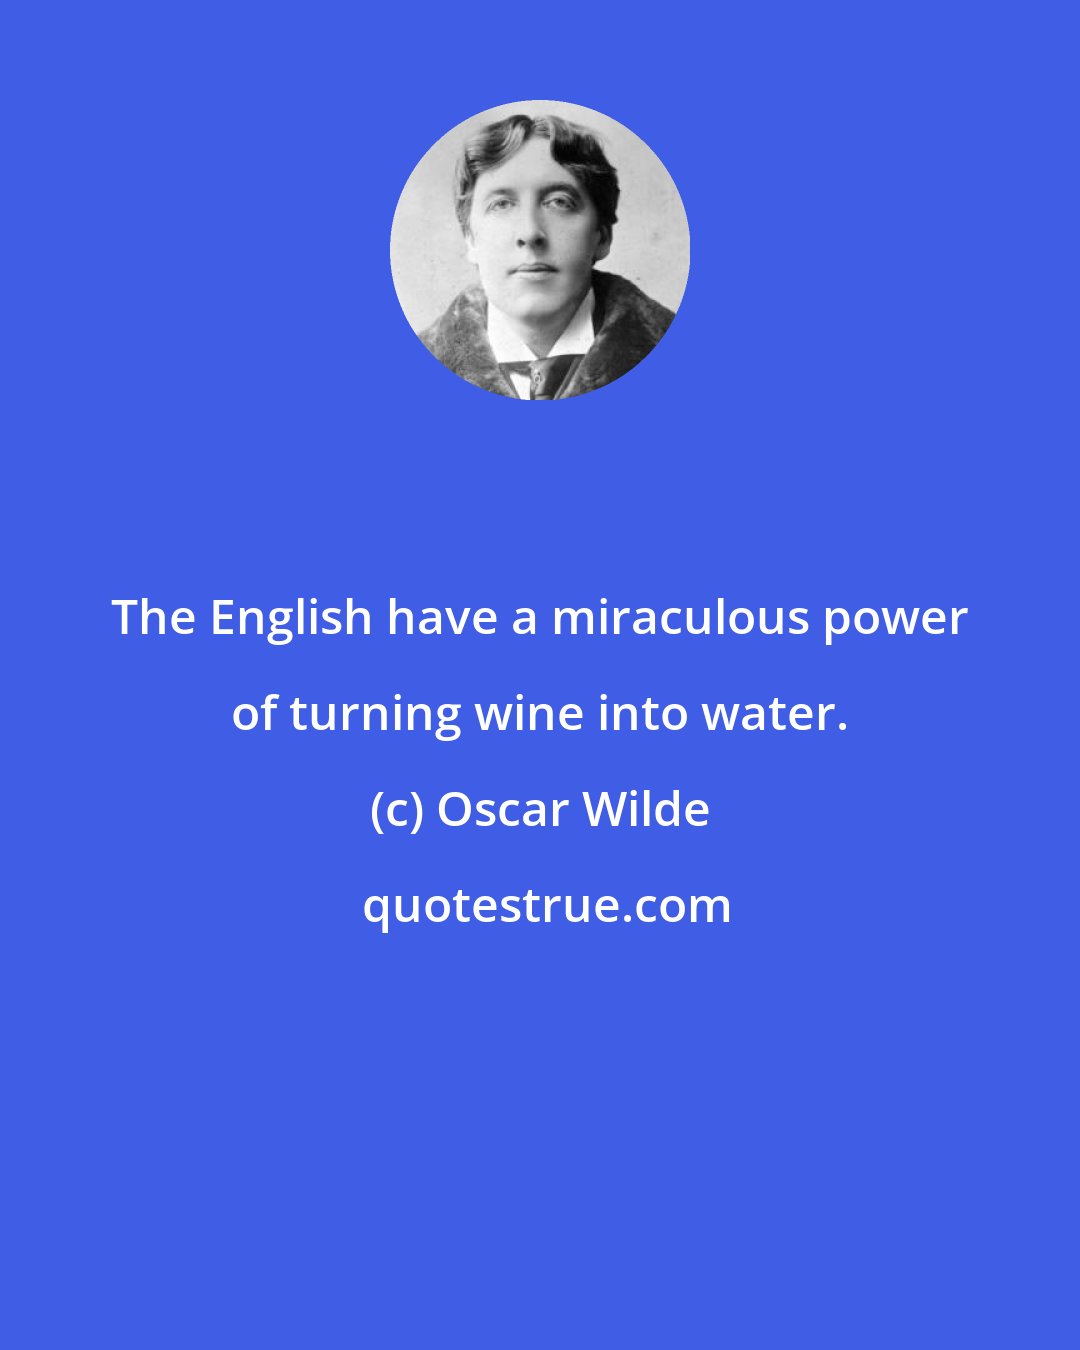 Oscar Wilde: The English have a miraculous power of turning wine into water.